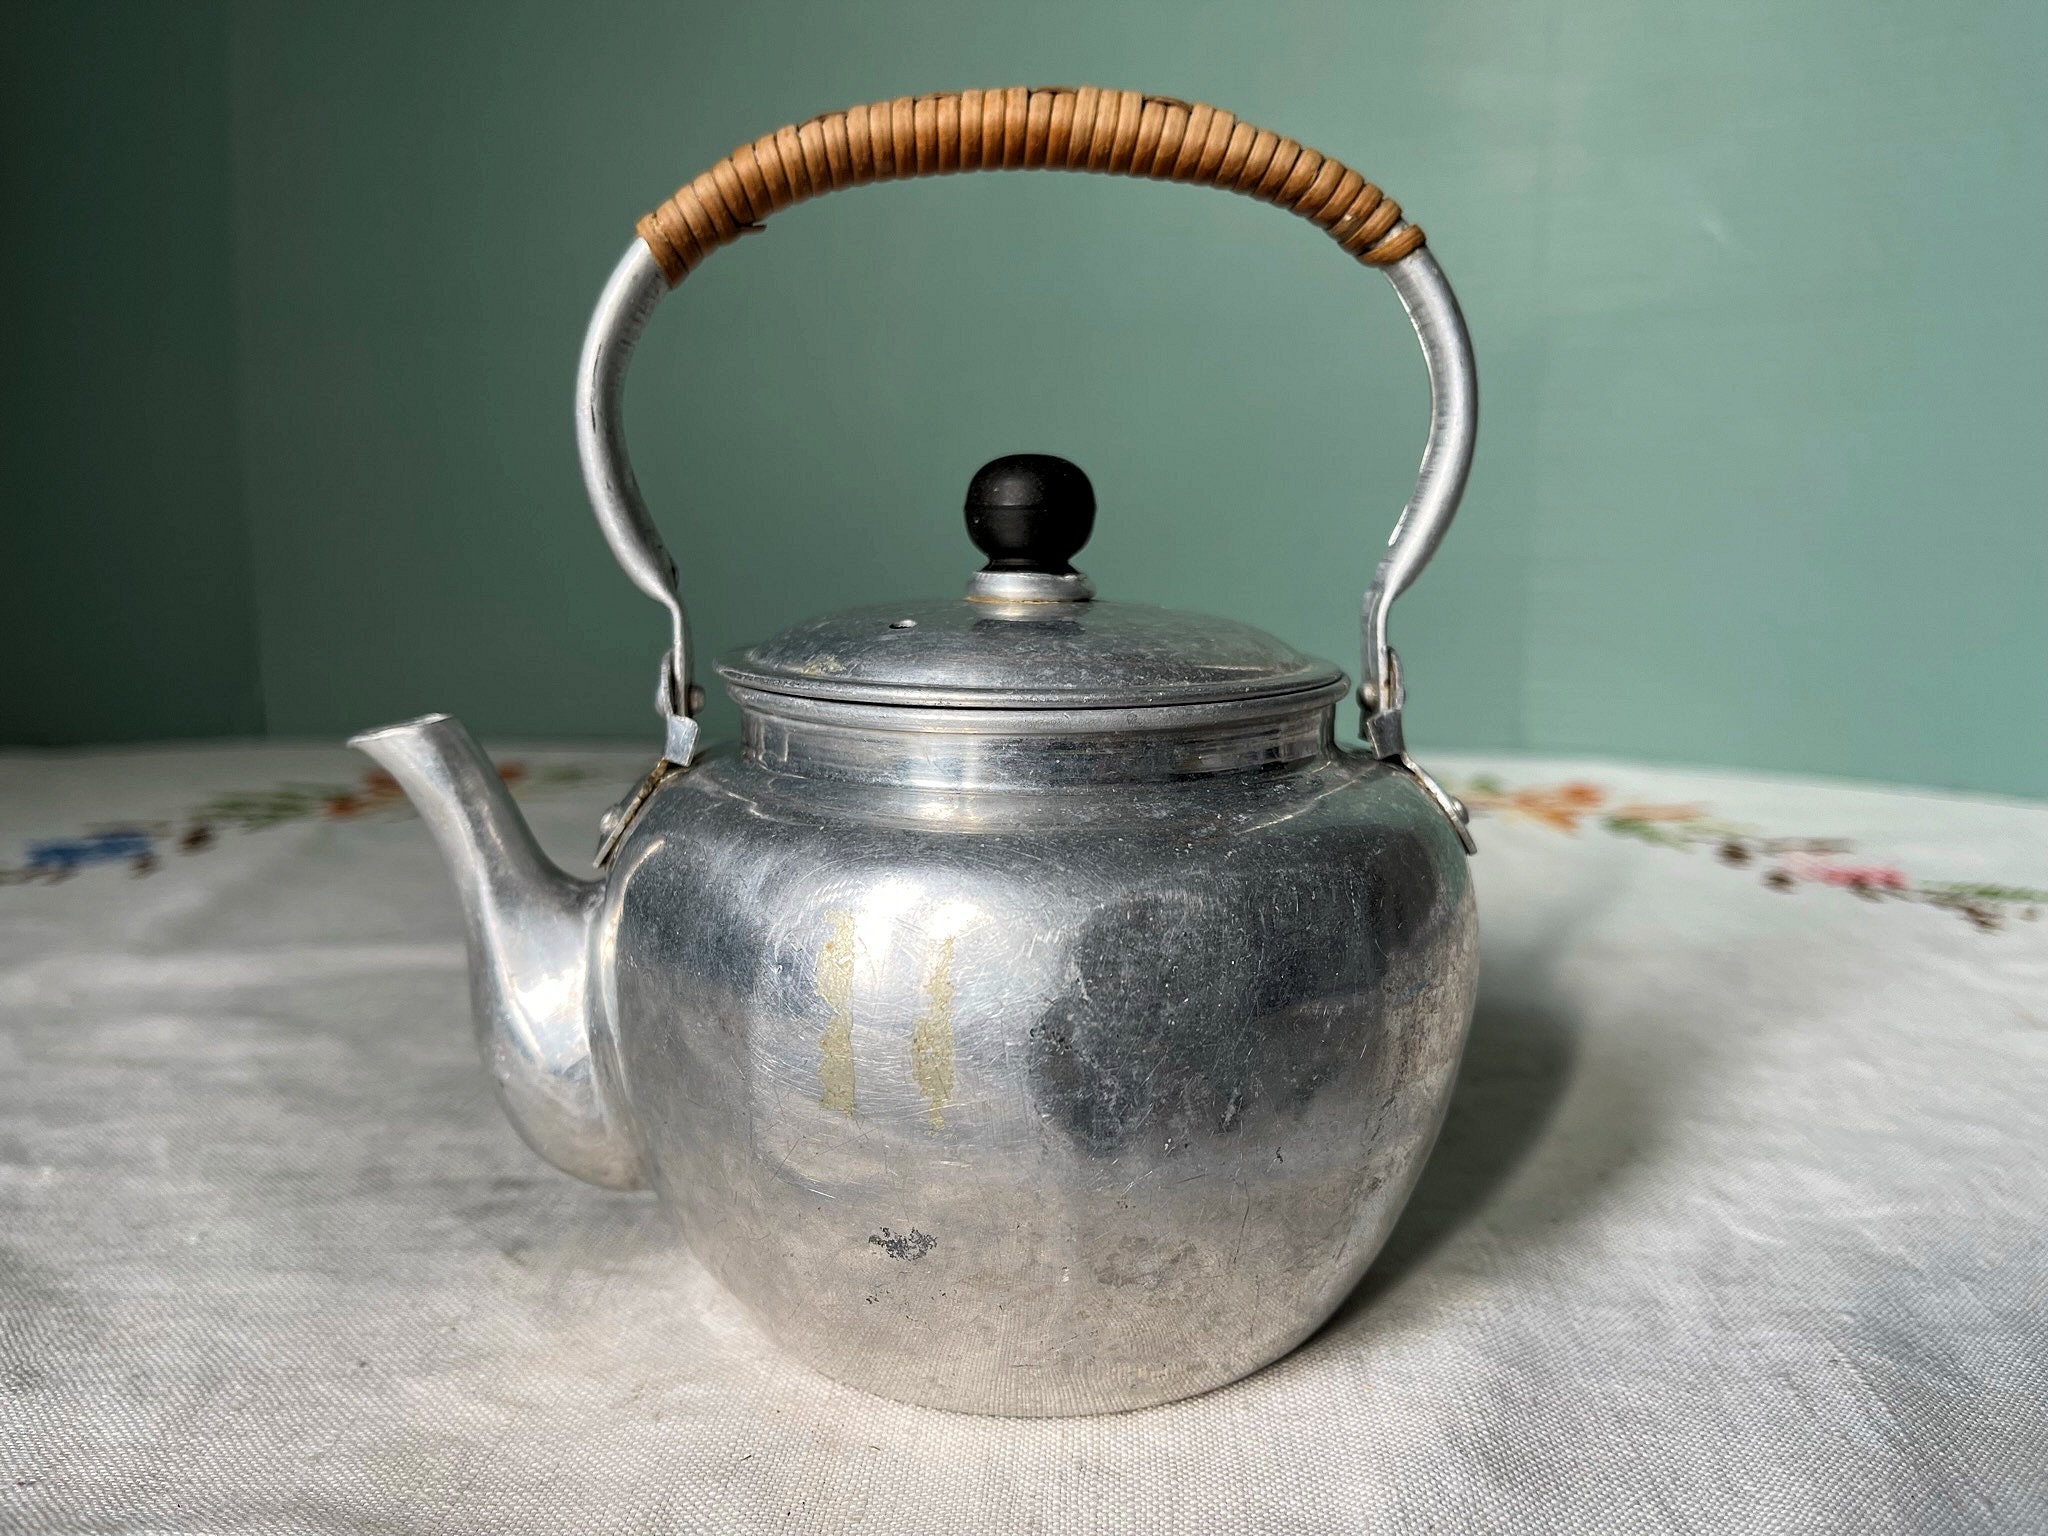 Vintage Tea Pot: Aluminum 2 Cup Water Kettle Grease Melter Canister Storage  Black Bakelite Plastic Knob Woven Wicker Handle - Made in Japan